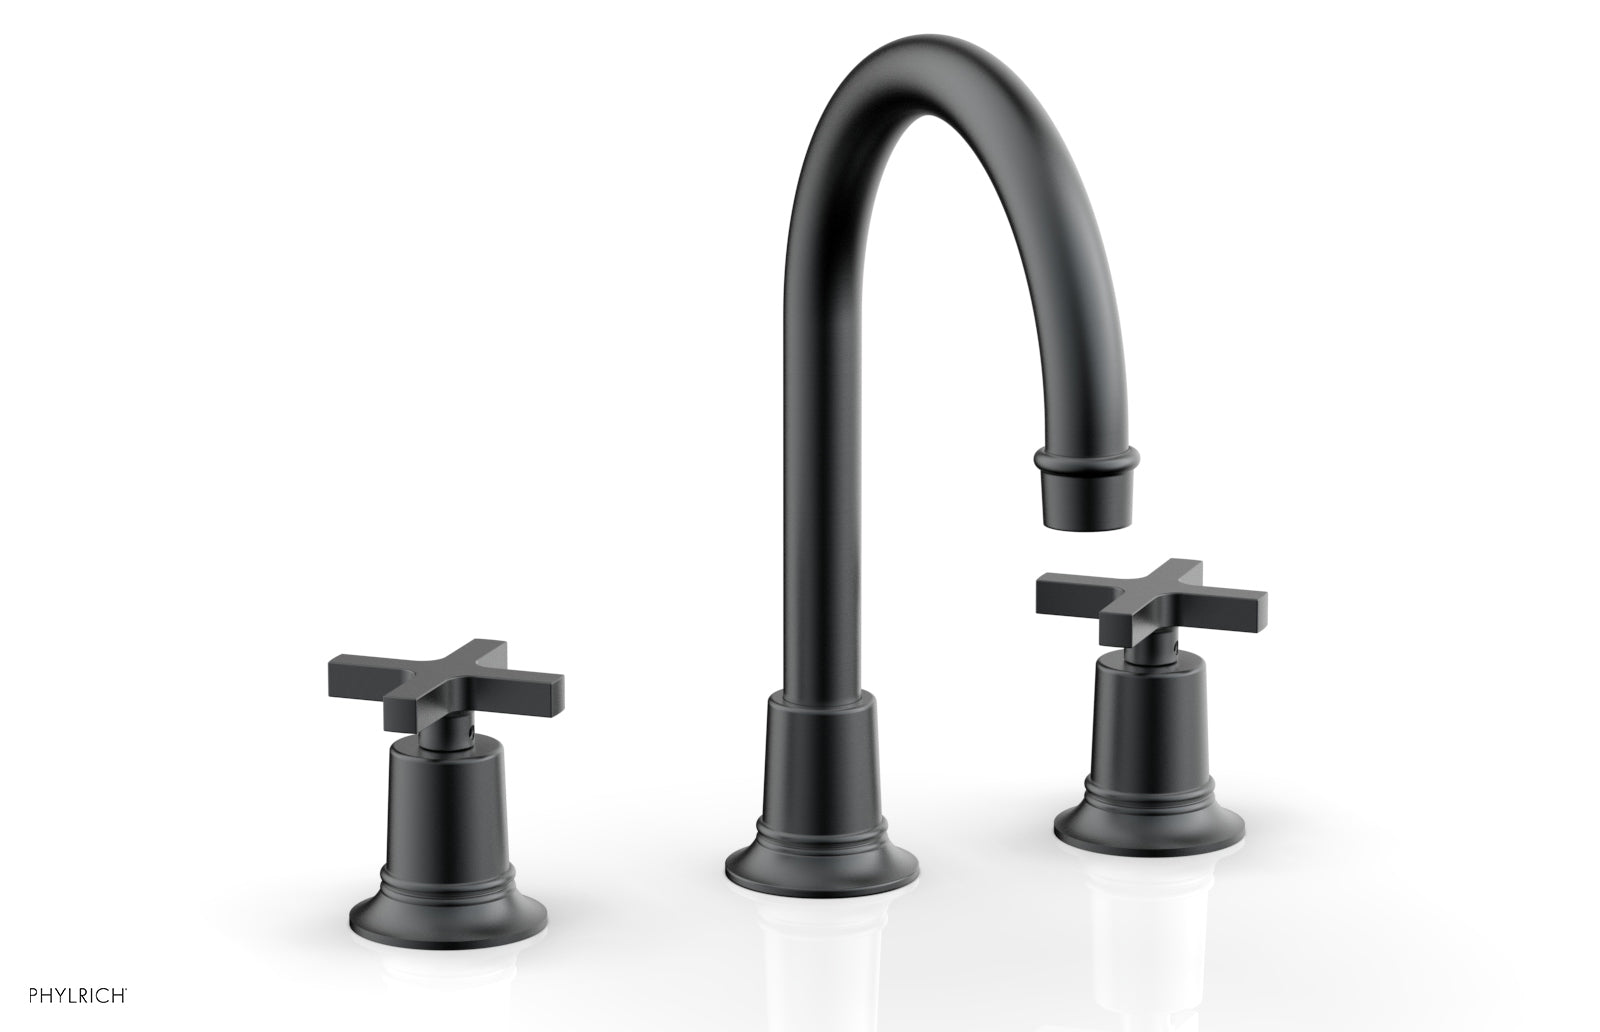 Phylrich HEX MODERN Widespread Faucet with Cross Handles